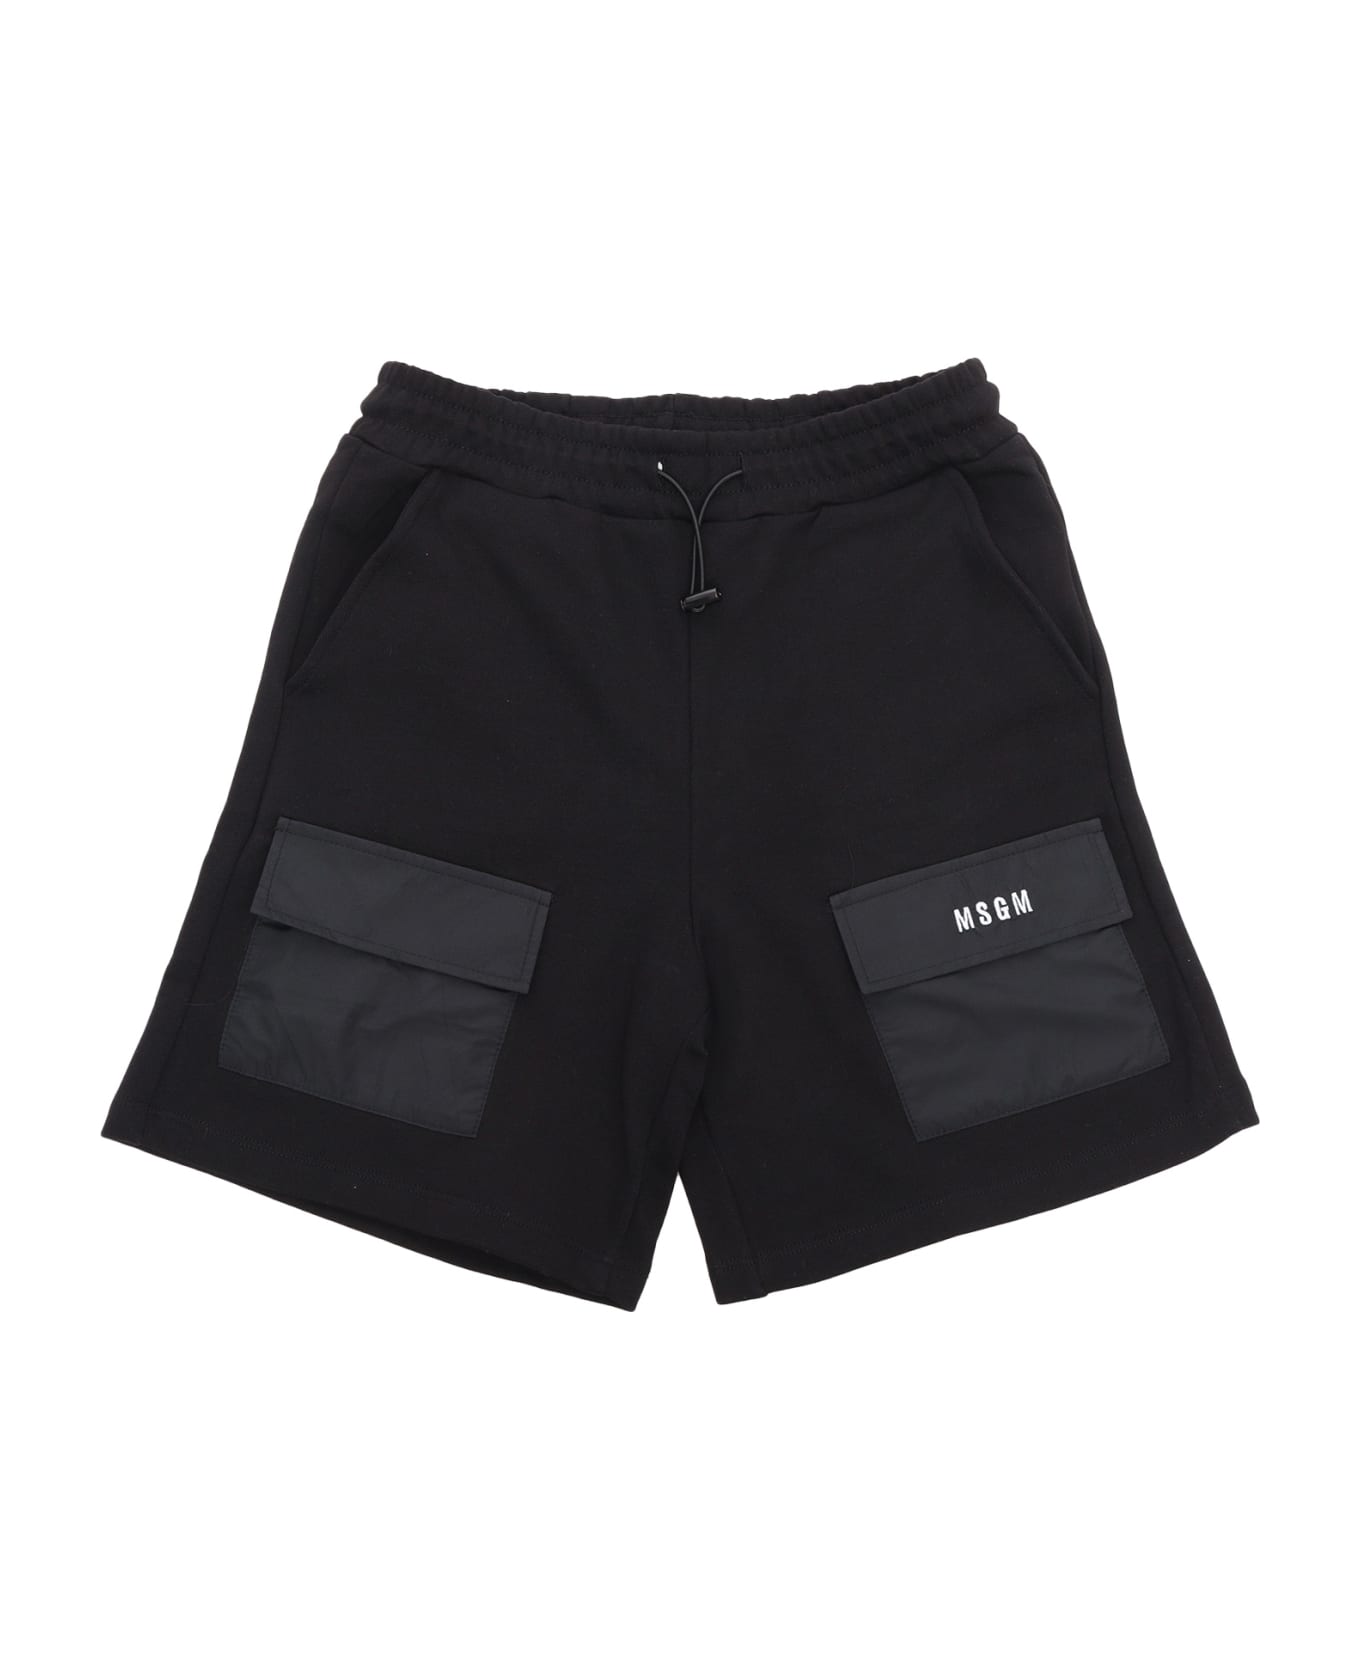 MSGM Black Shorts For Girls With Patch Pockets On The Front, Elastic Waistband With Drawstring, Welt Pockets. - BLACK